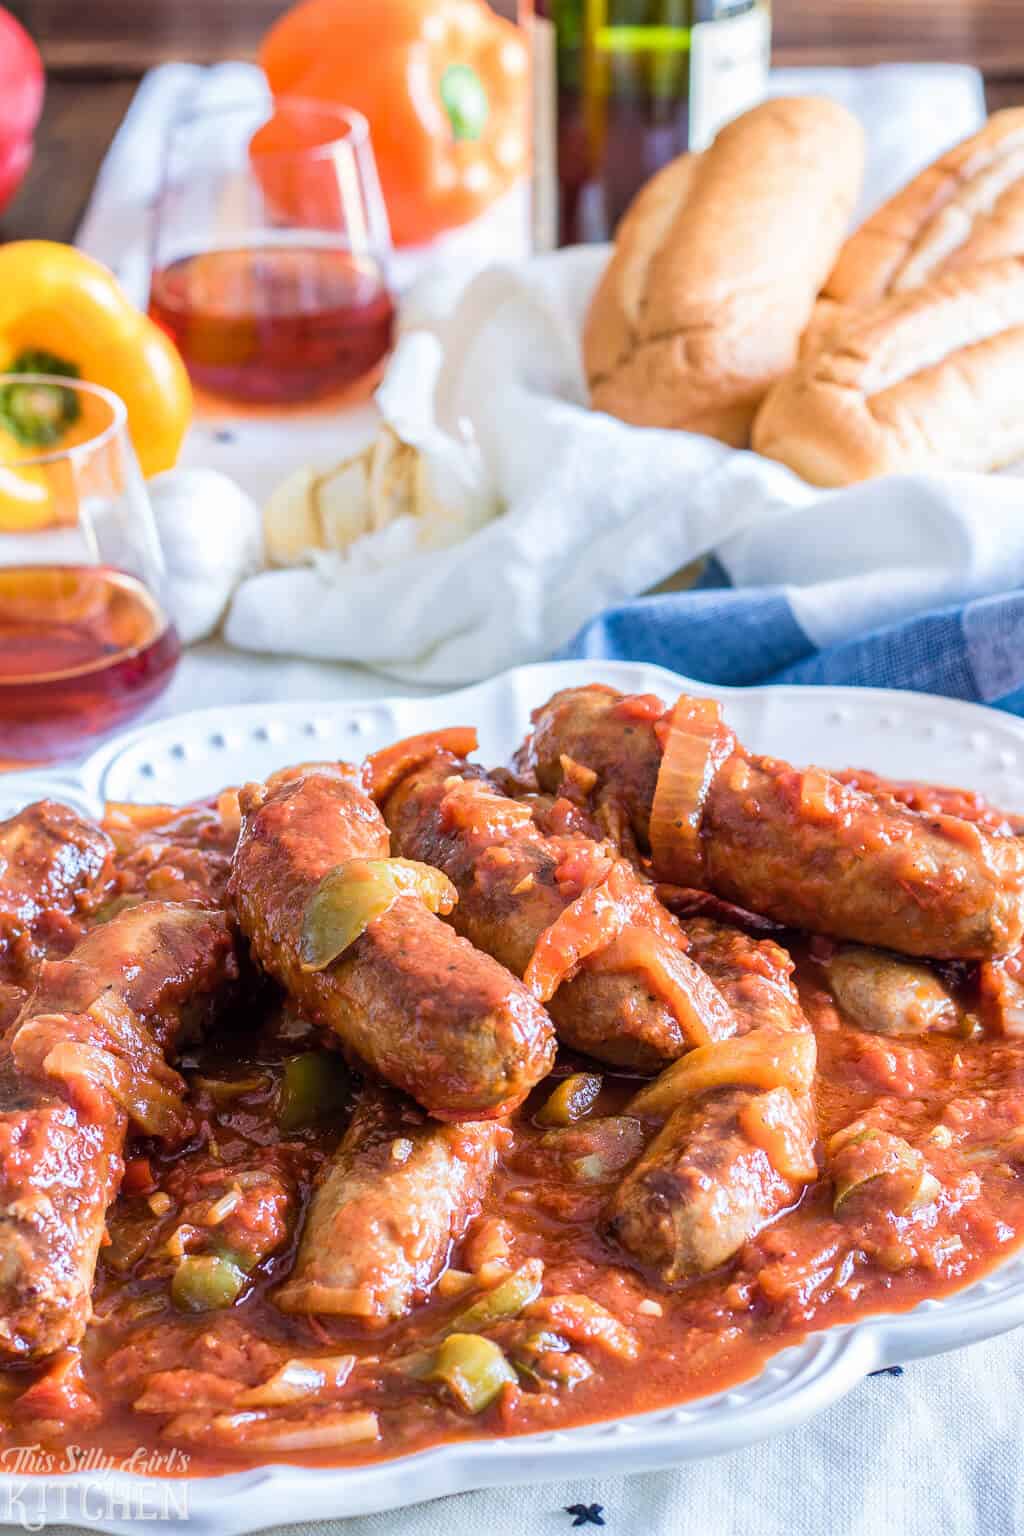 Marsala Sausage and Peppers on white platter with wine and rolls in background.